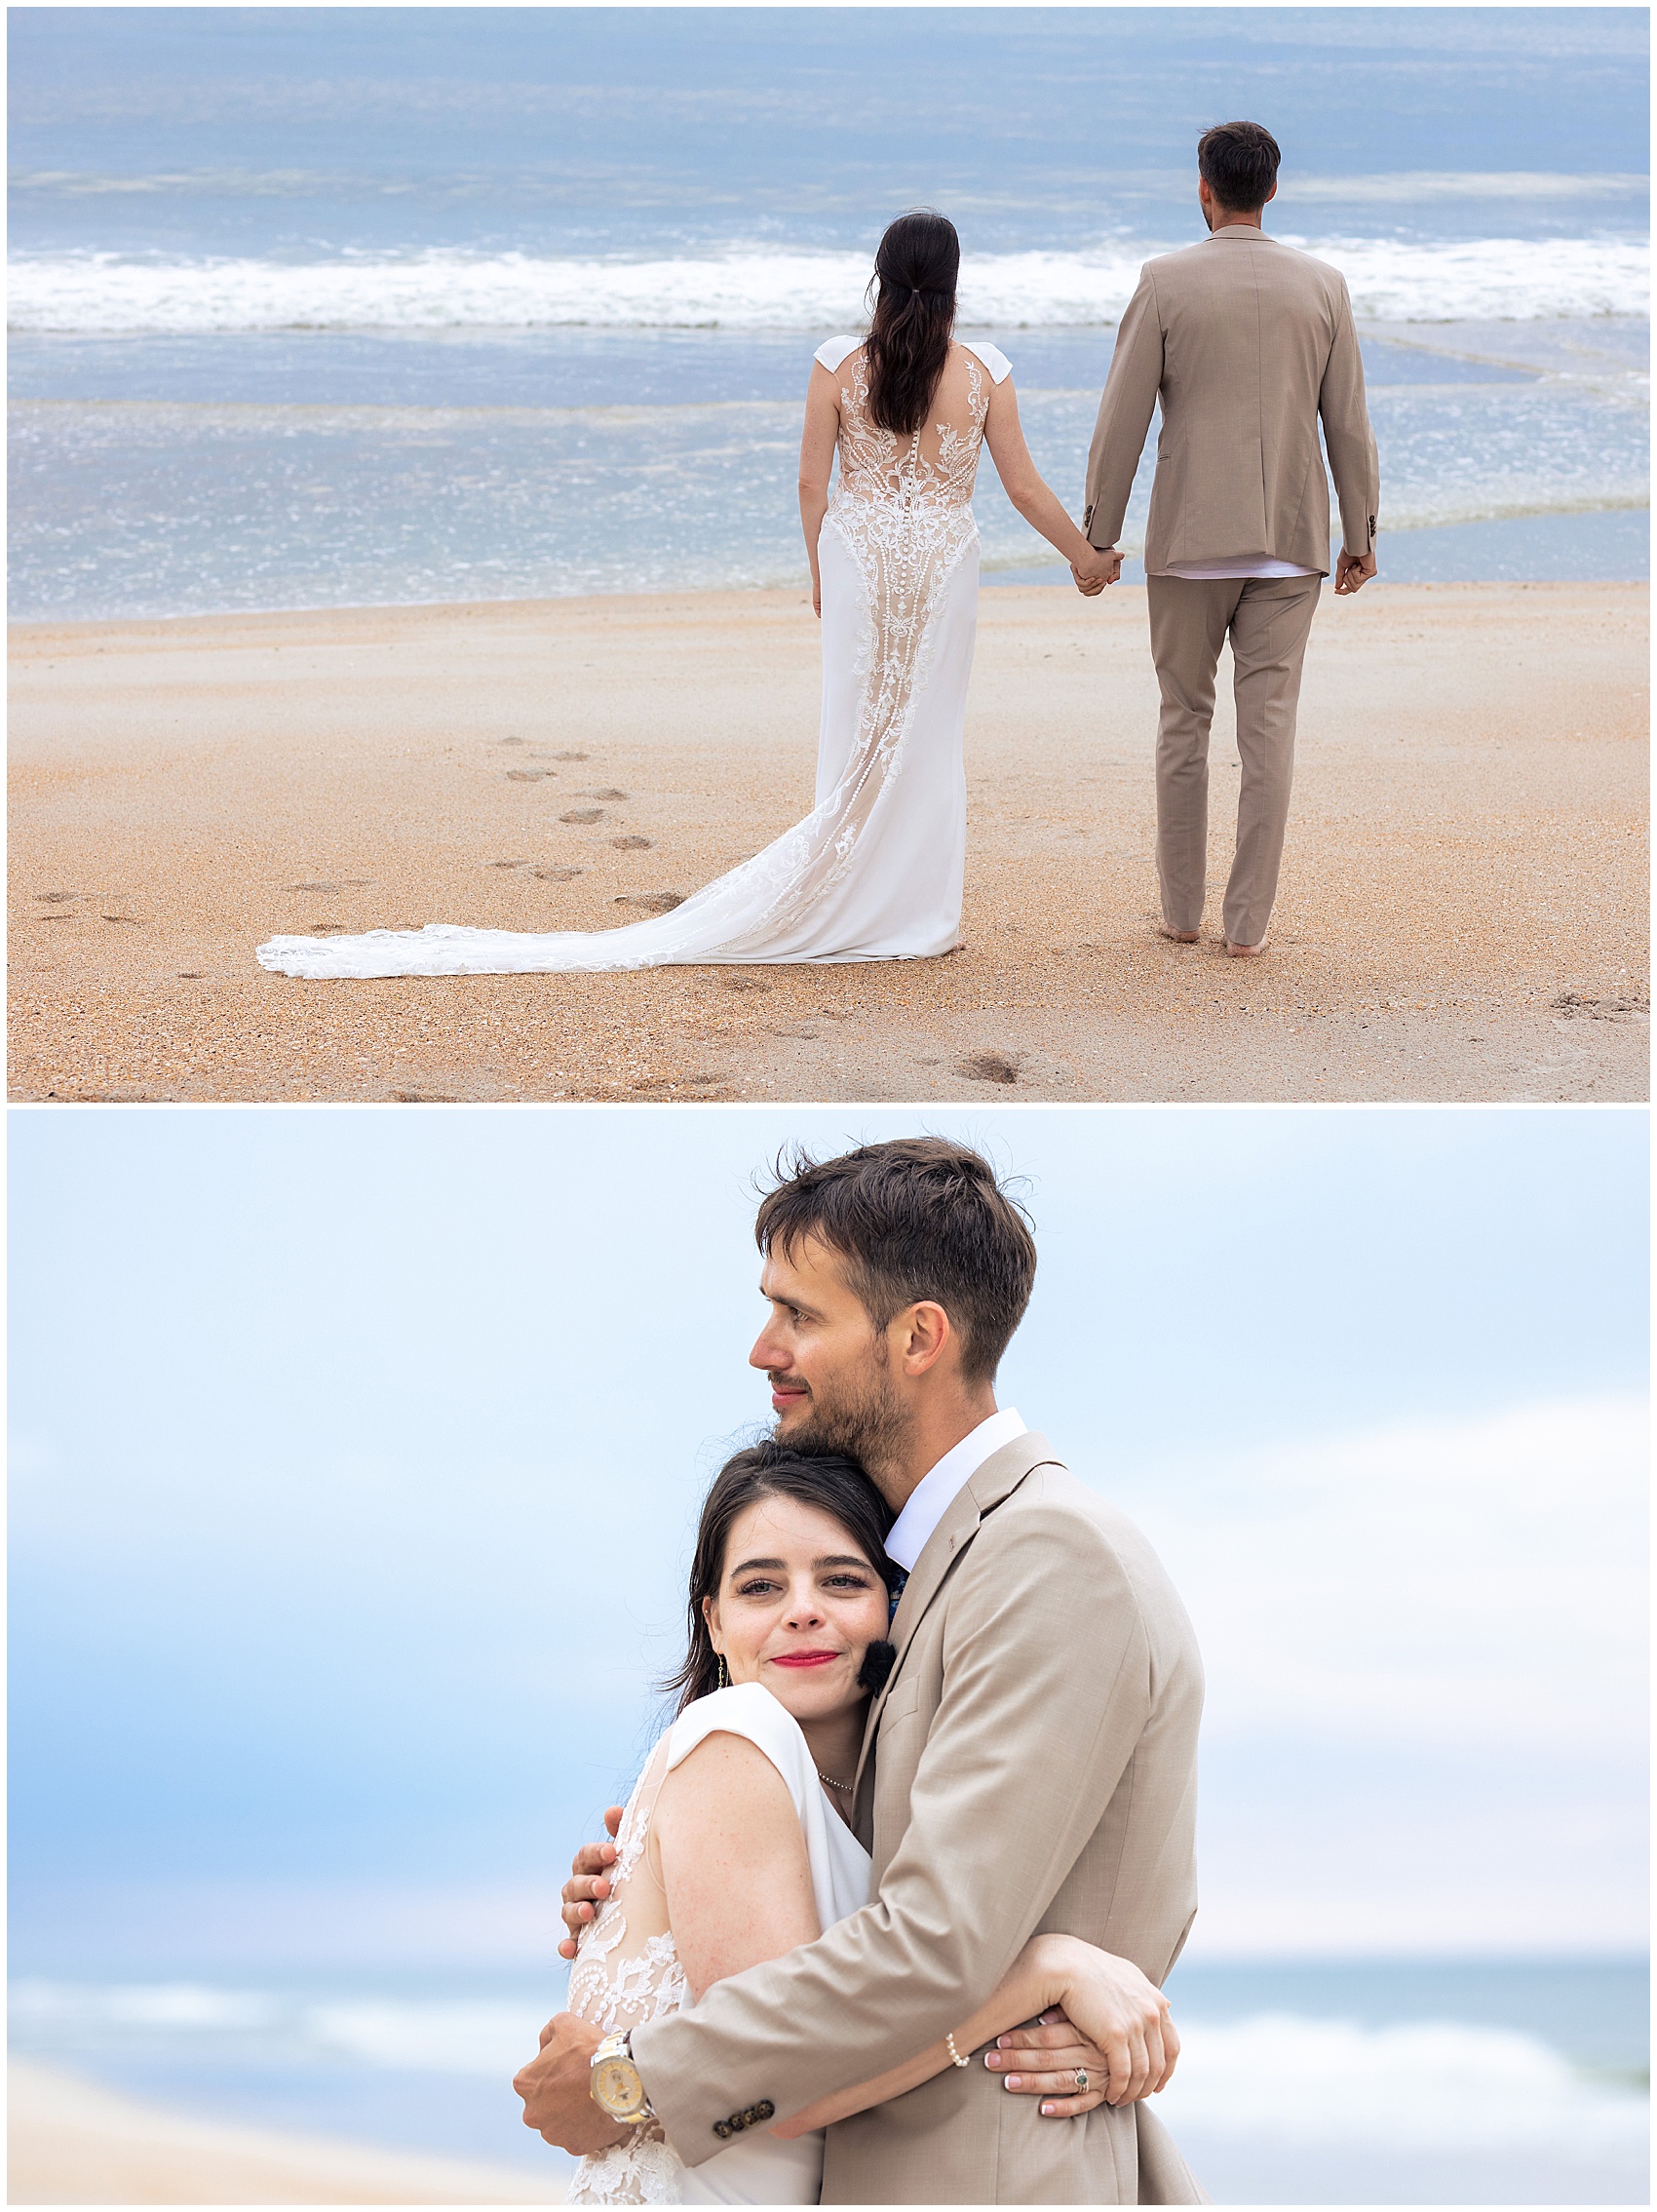 Newlyweds walk down a beach holding hands and hugging